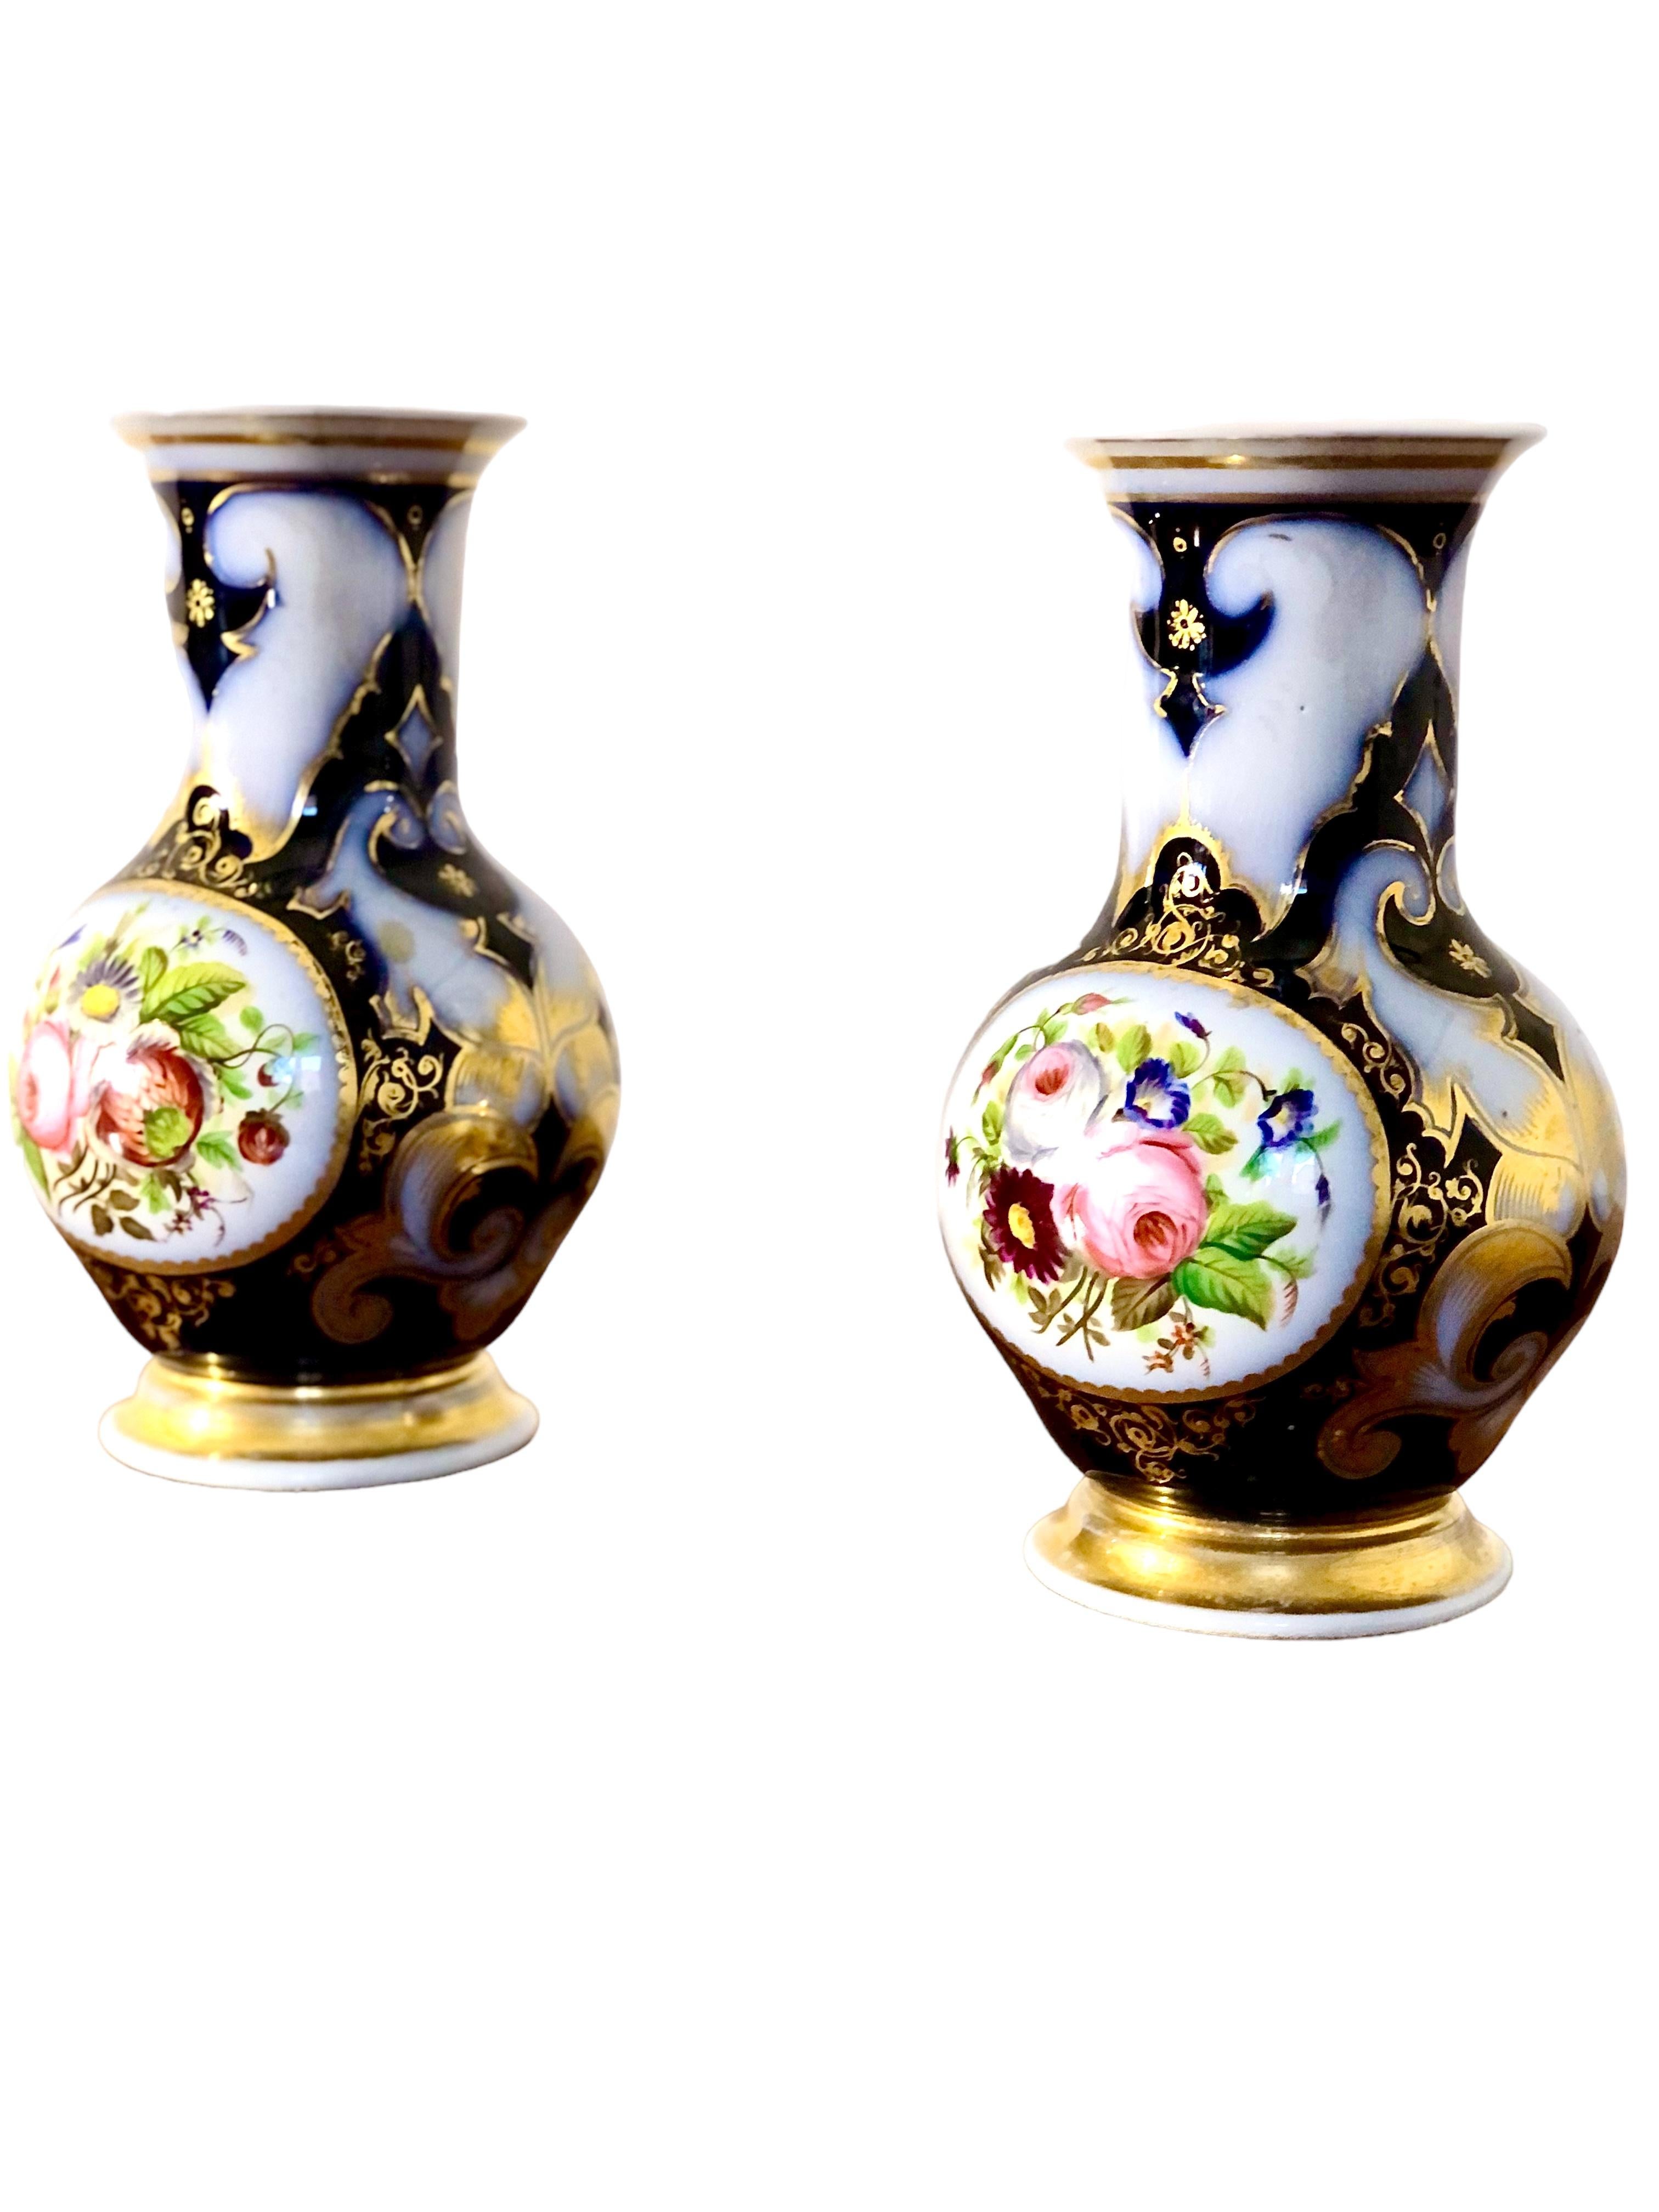 These exquisite Parisian porcelain vases boast a timeless elegance that is sure to impress any art lover. Their classic design features a stunning navy blue backdrop that perfectly sets off the beautifully painted roses that adorn them. The